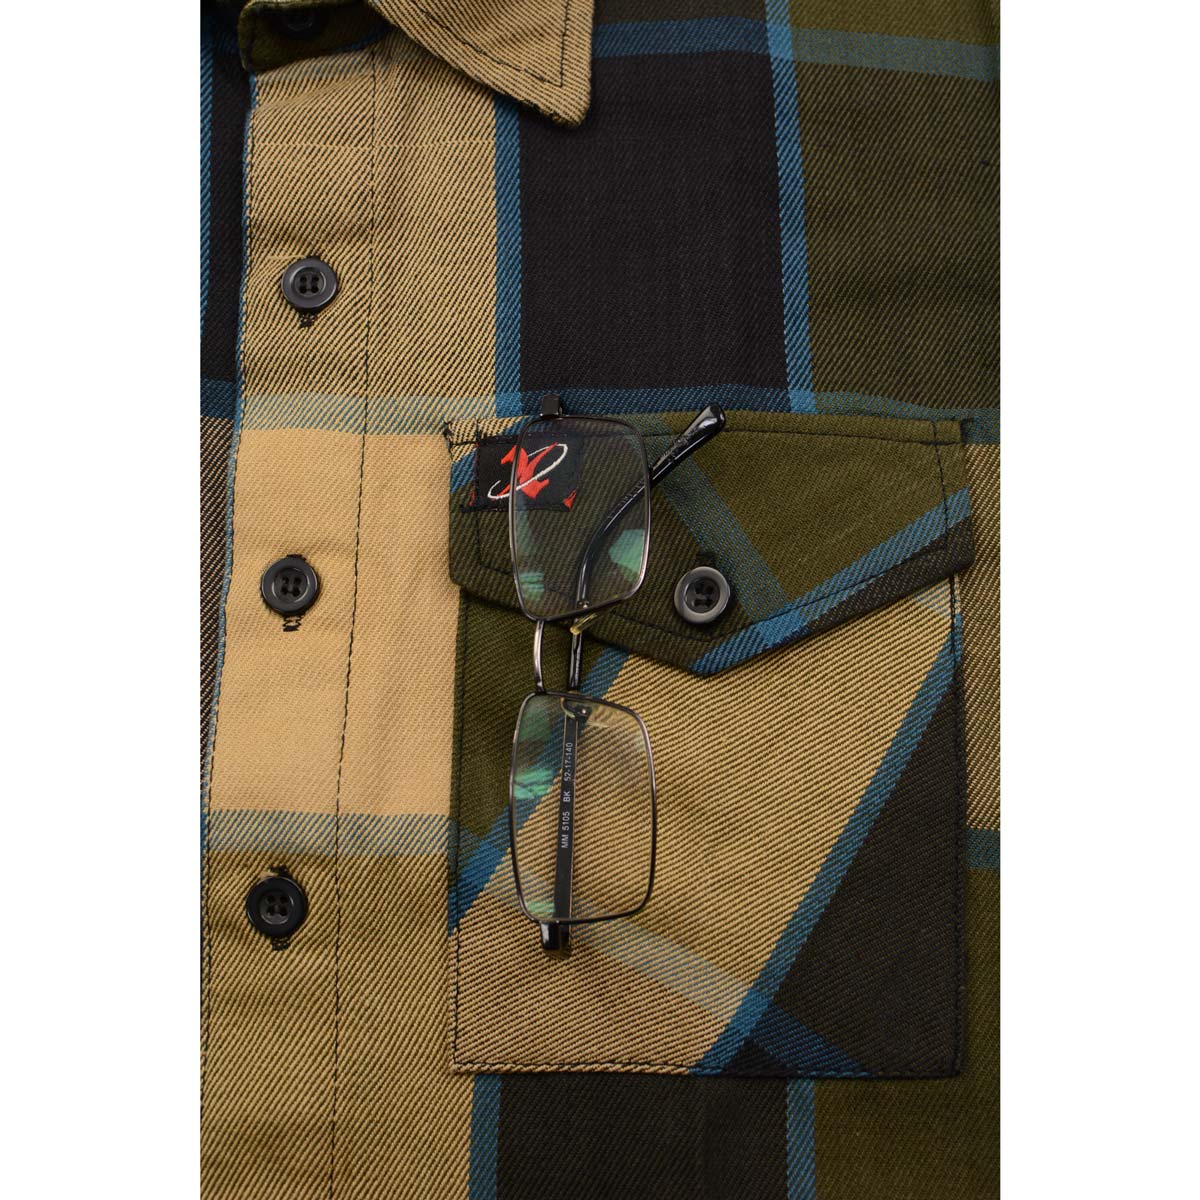 Milwaukee Leather Men's Flannel Plaid Shirt Beige with Black and Blue Long Sleeve Cotton Button Down Shirt MNG11639